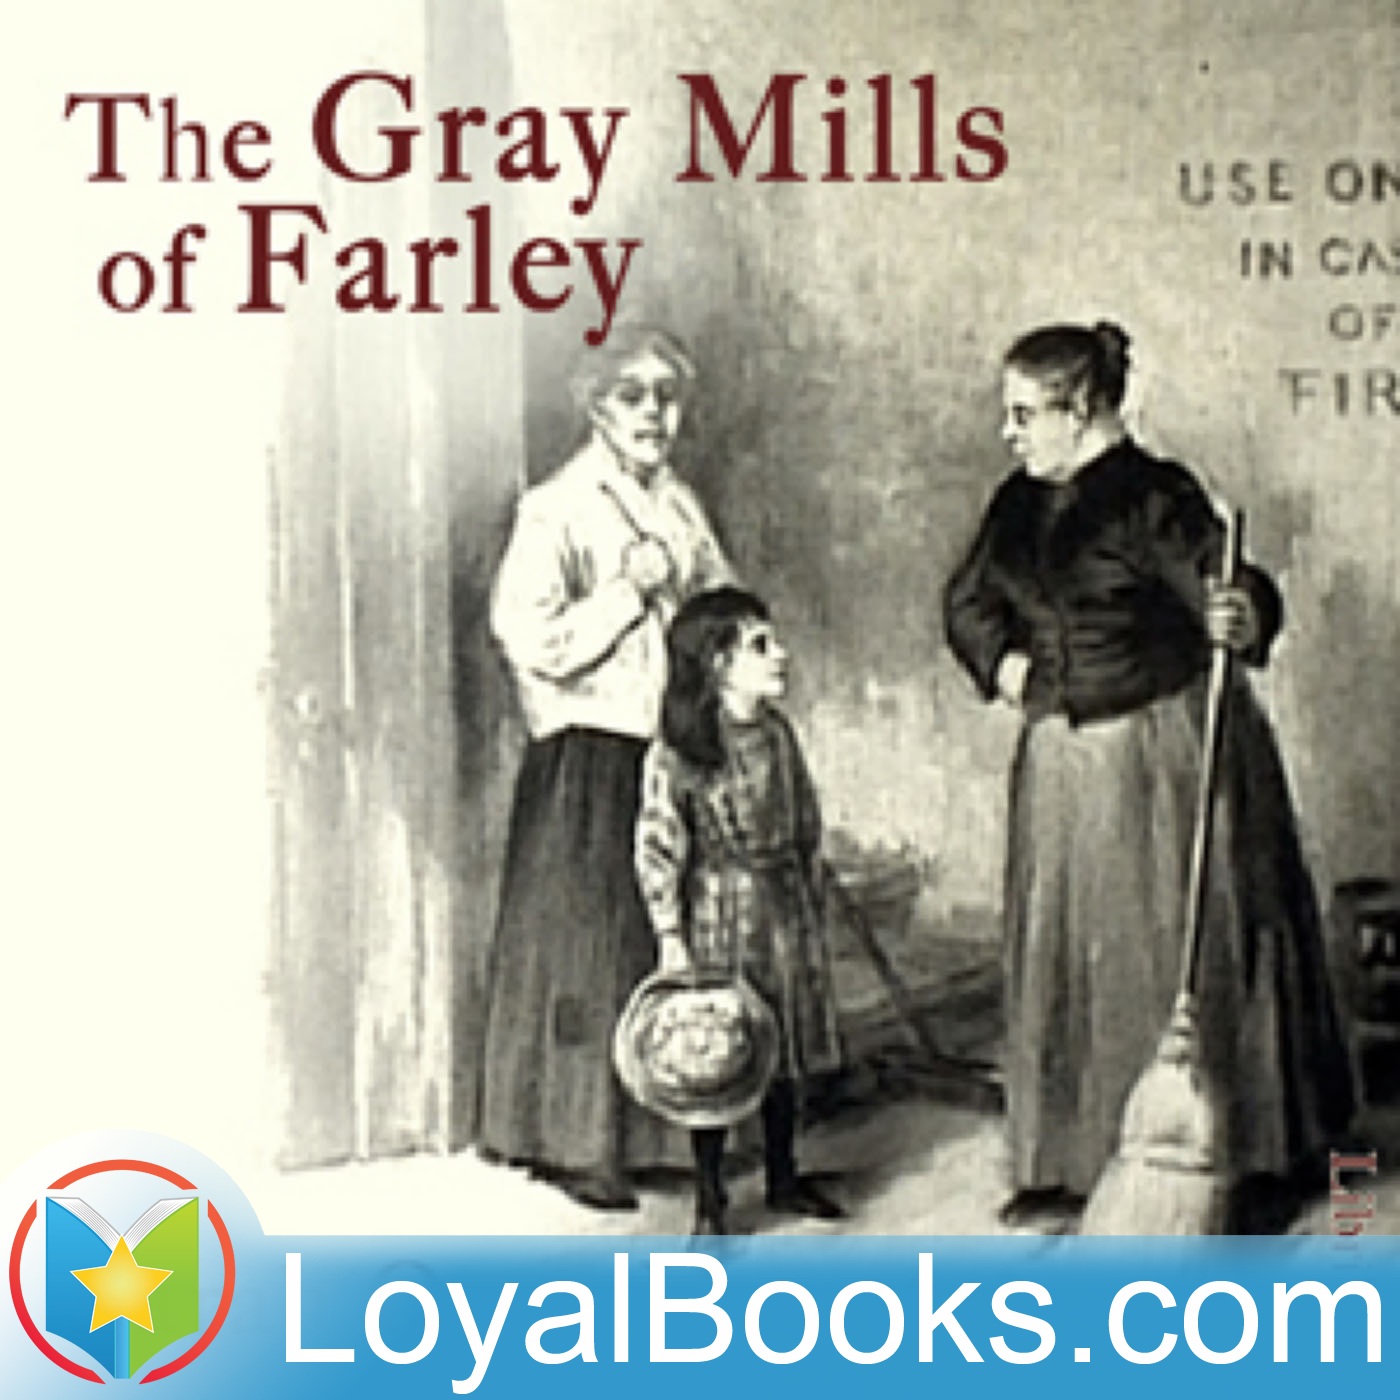 The Gray Mills of Farley by Sarah Orne Jewett